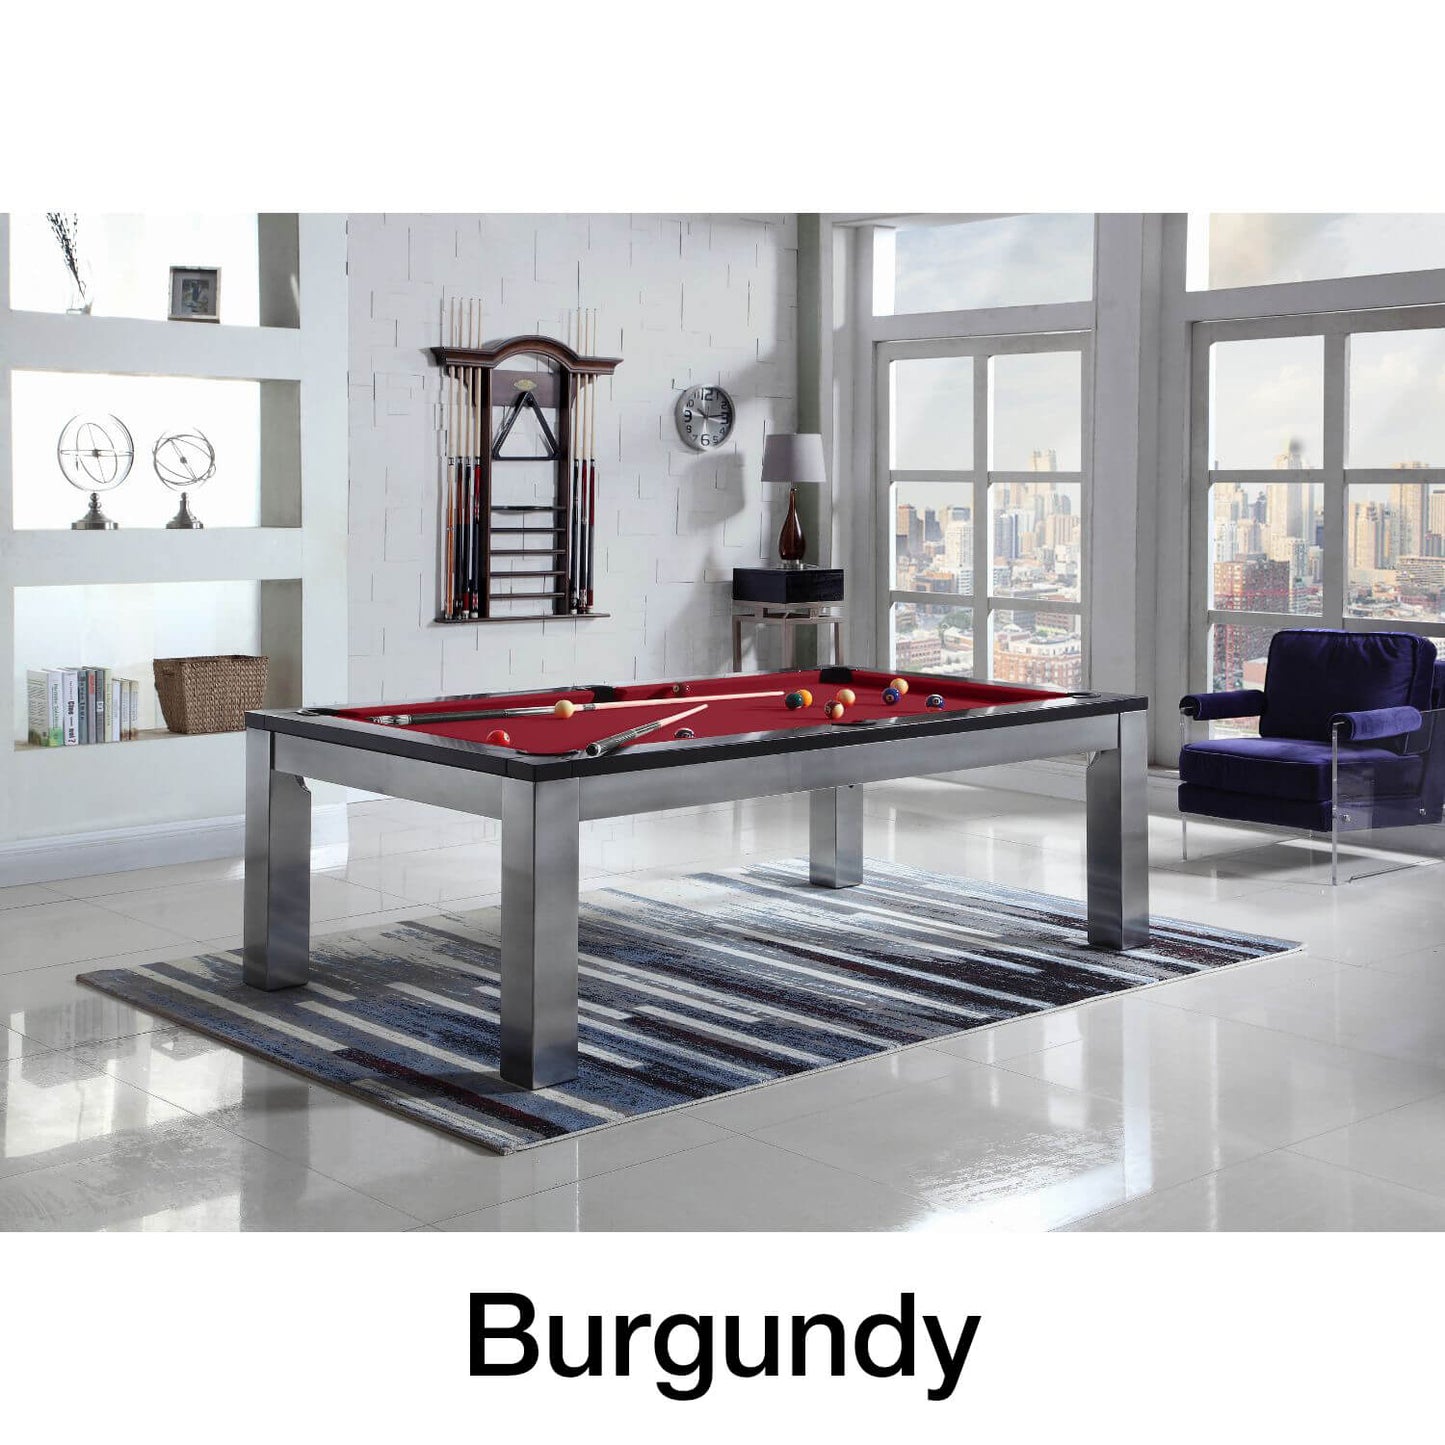 Playcraft Monaco Slate Pool Table with Dining Top